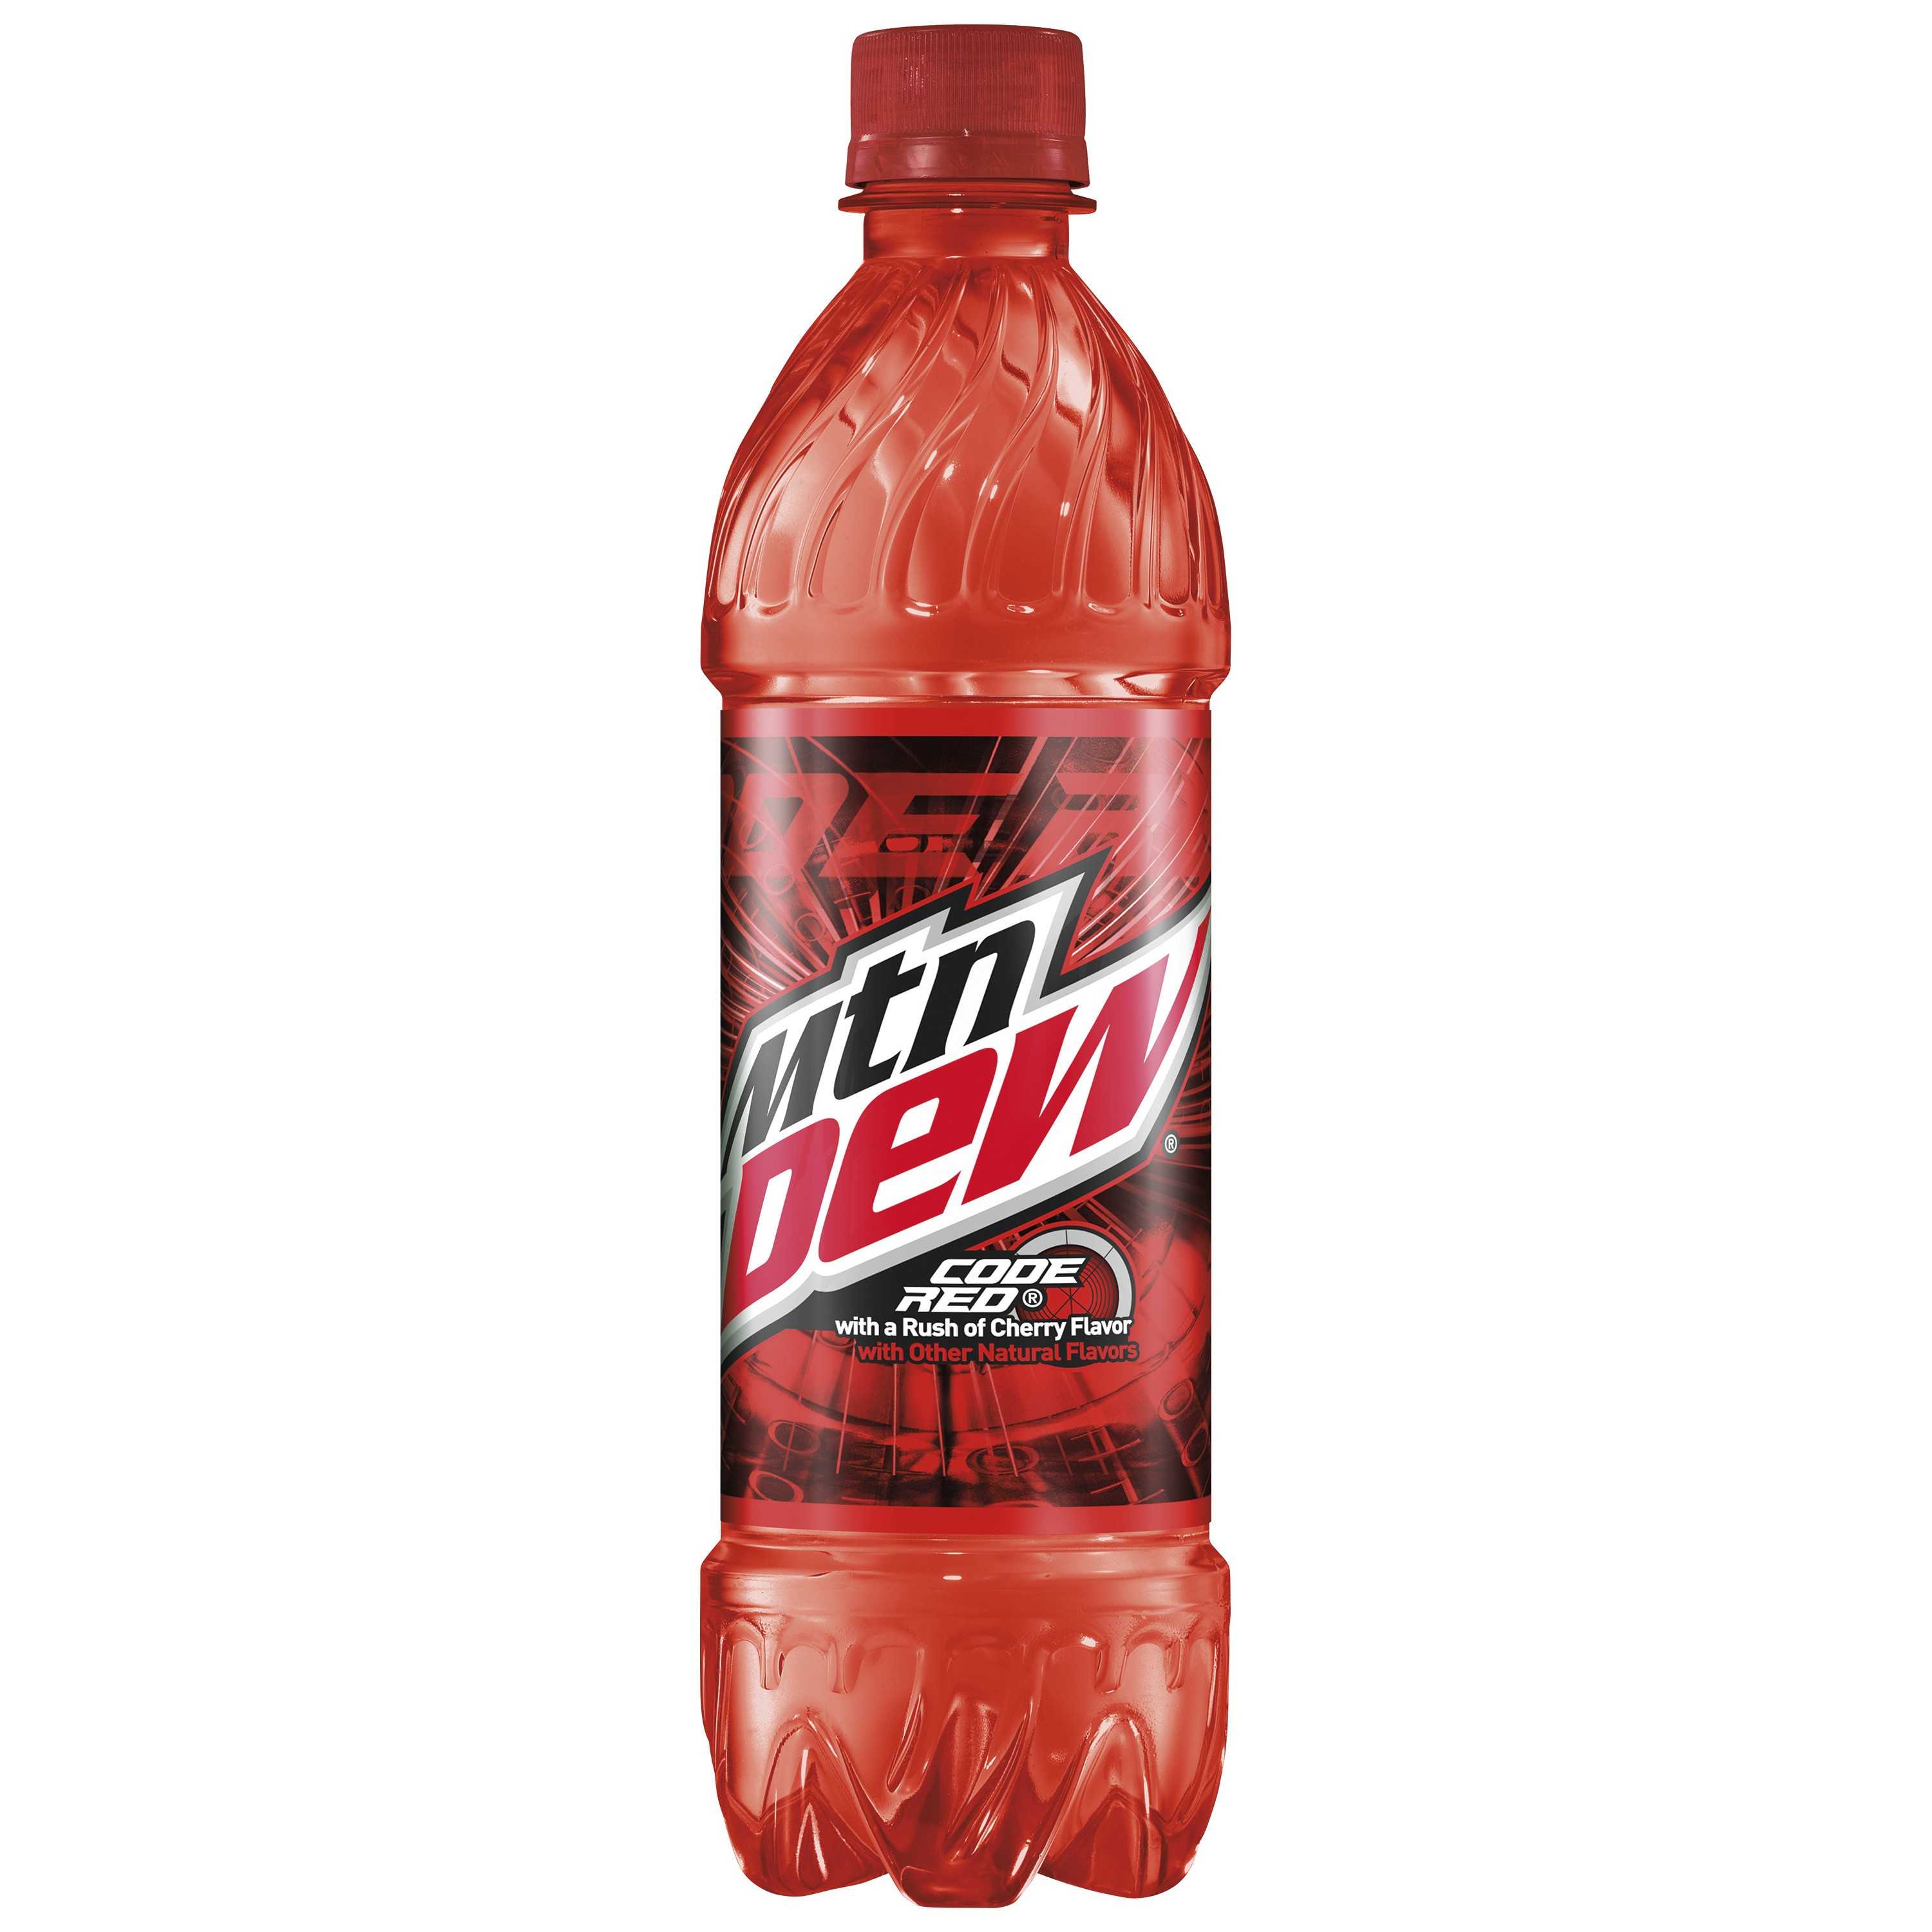 Mountain Dew Code Red Soda16.9 oz Bottles, 6 Count